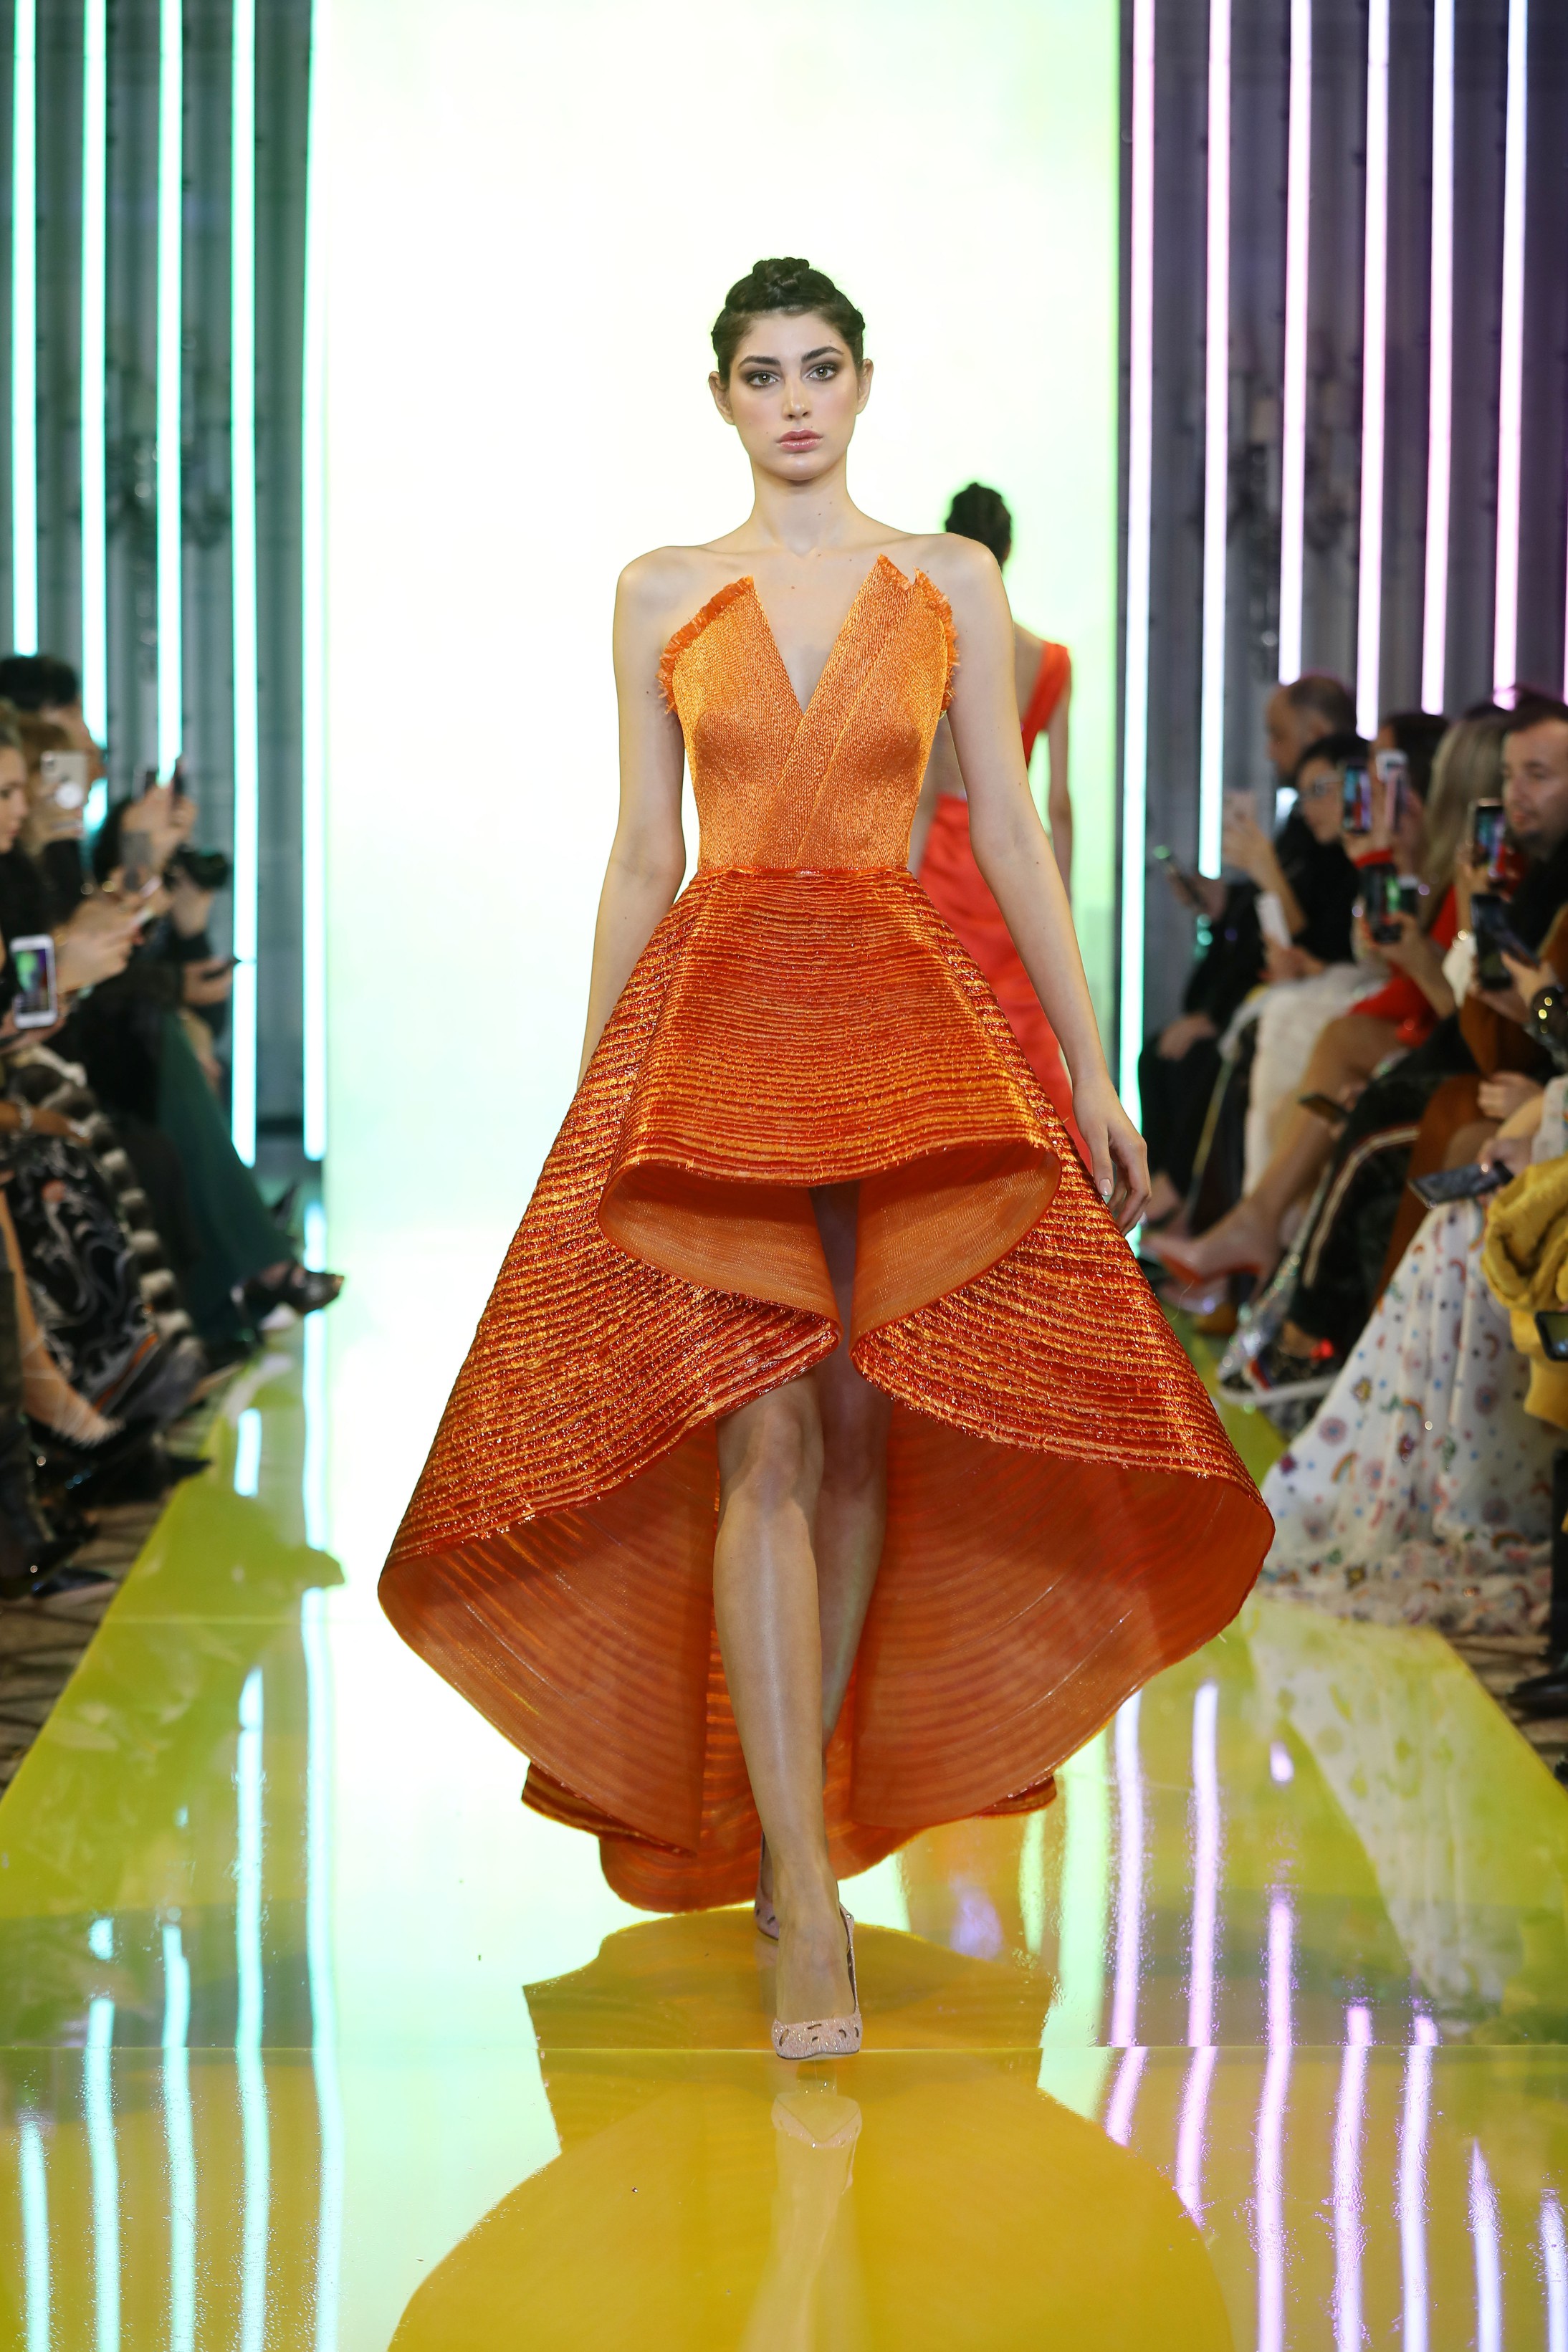 SS19-13 Orange Strapless Gown Featuring A Bodice Embellished With Raffia And A Voluminous Skirt Hand Appliquéd With PVC And Raffia.jpg